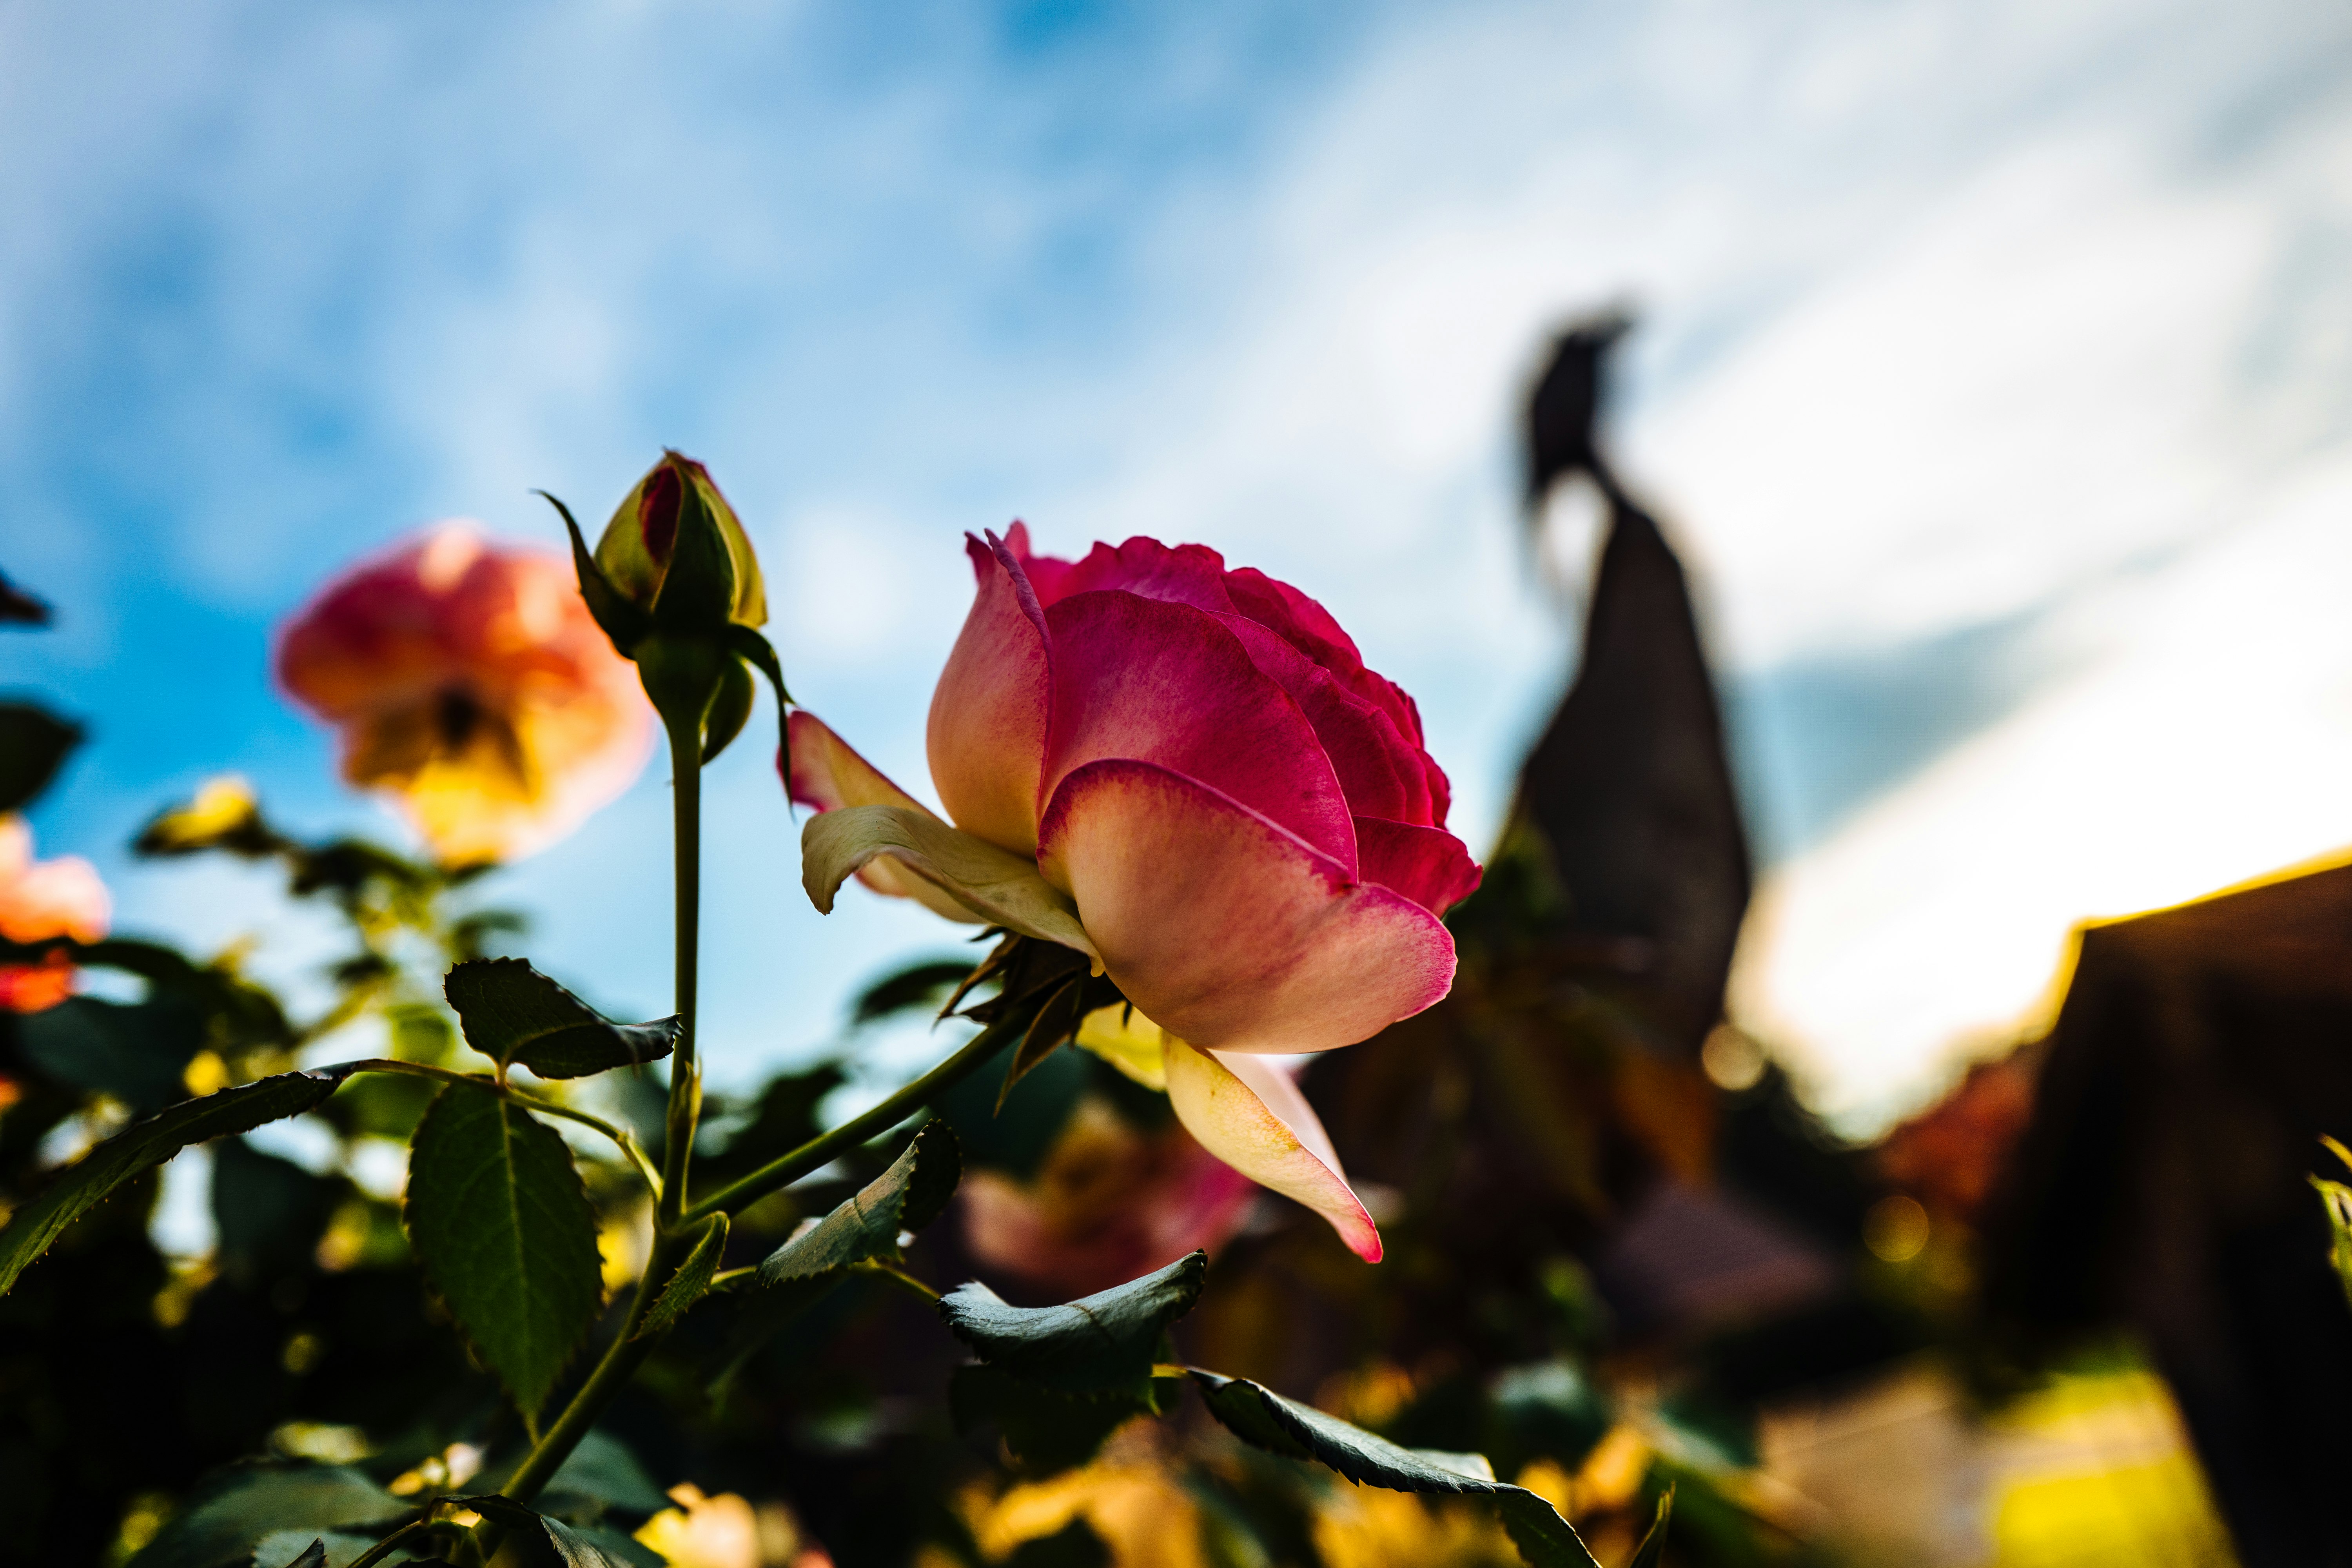 selective focus photography of pink rose flower